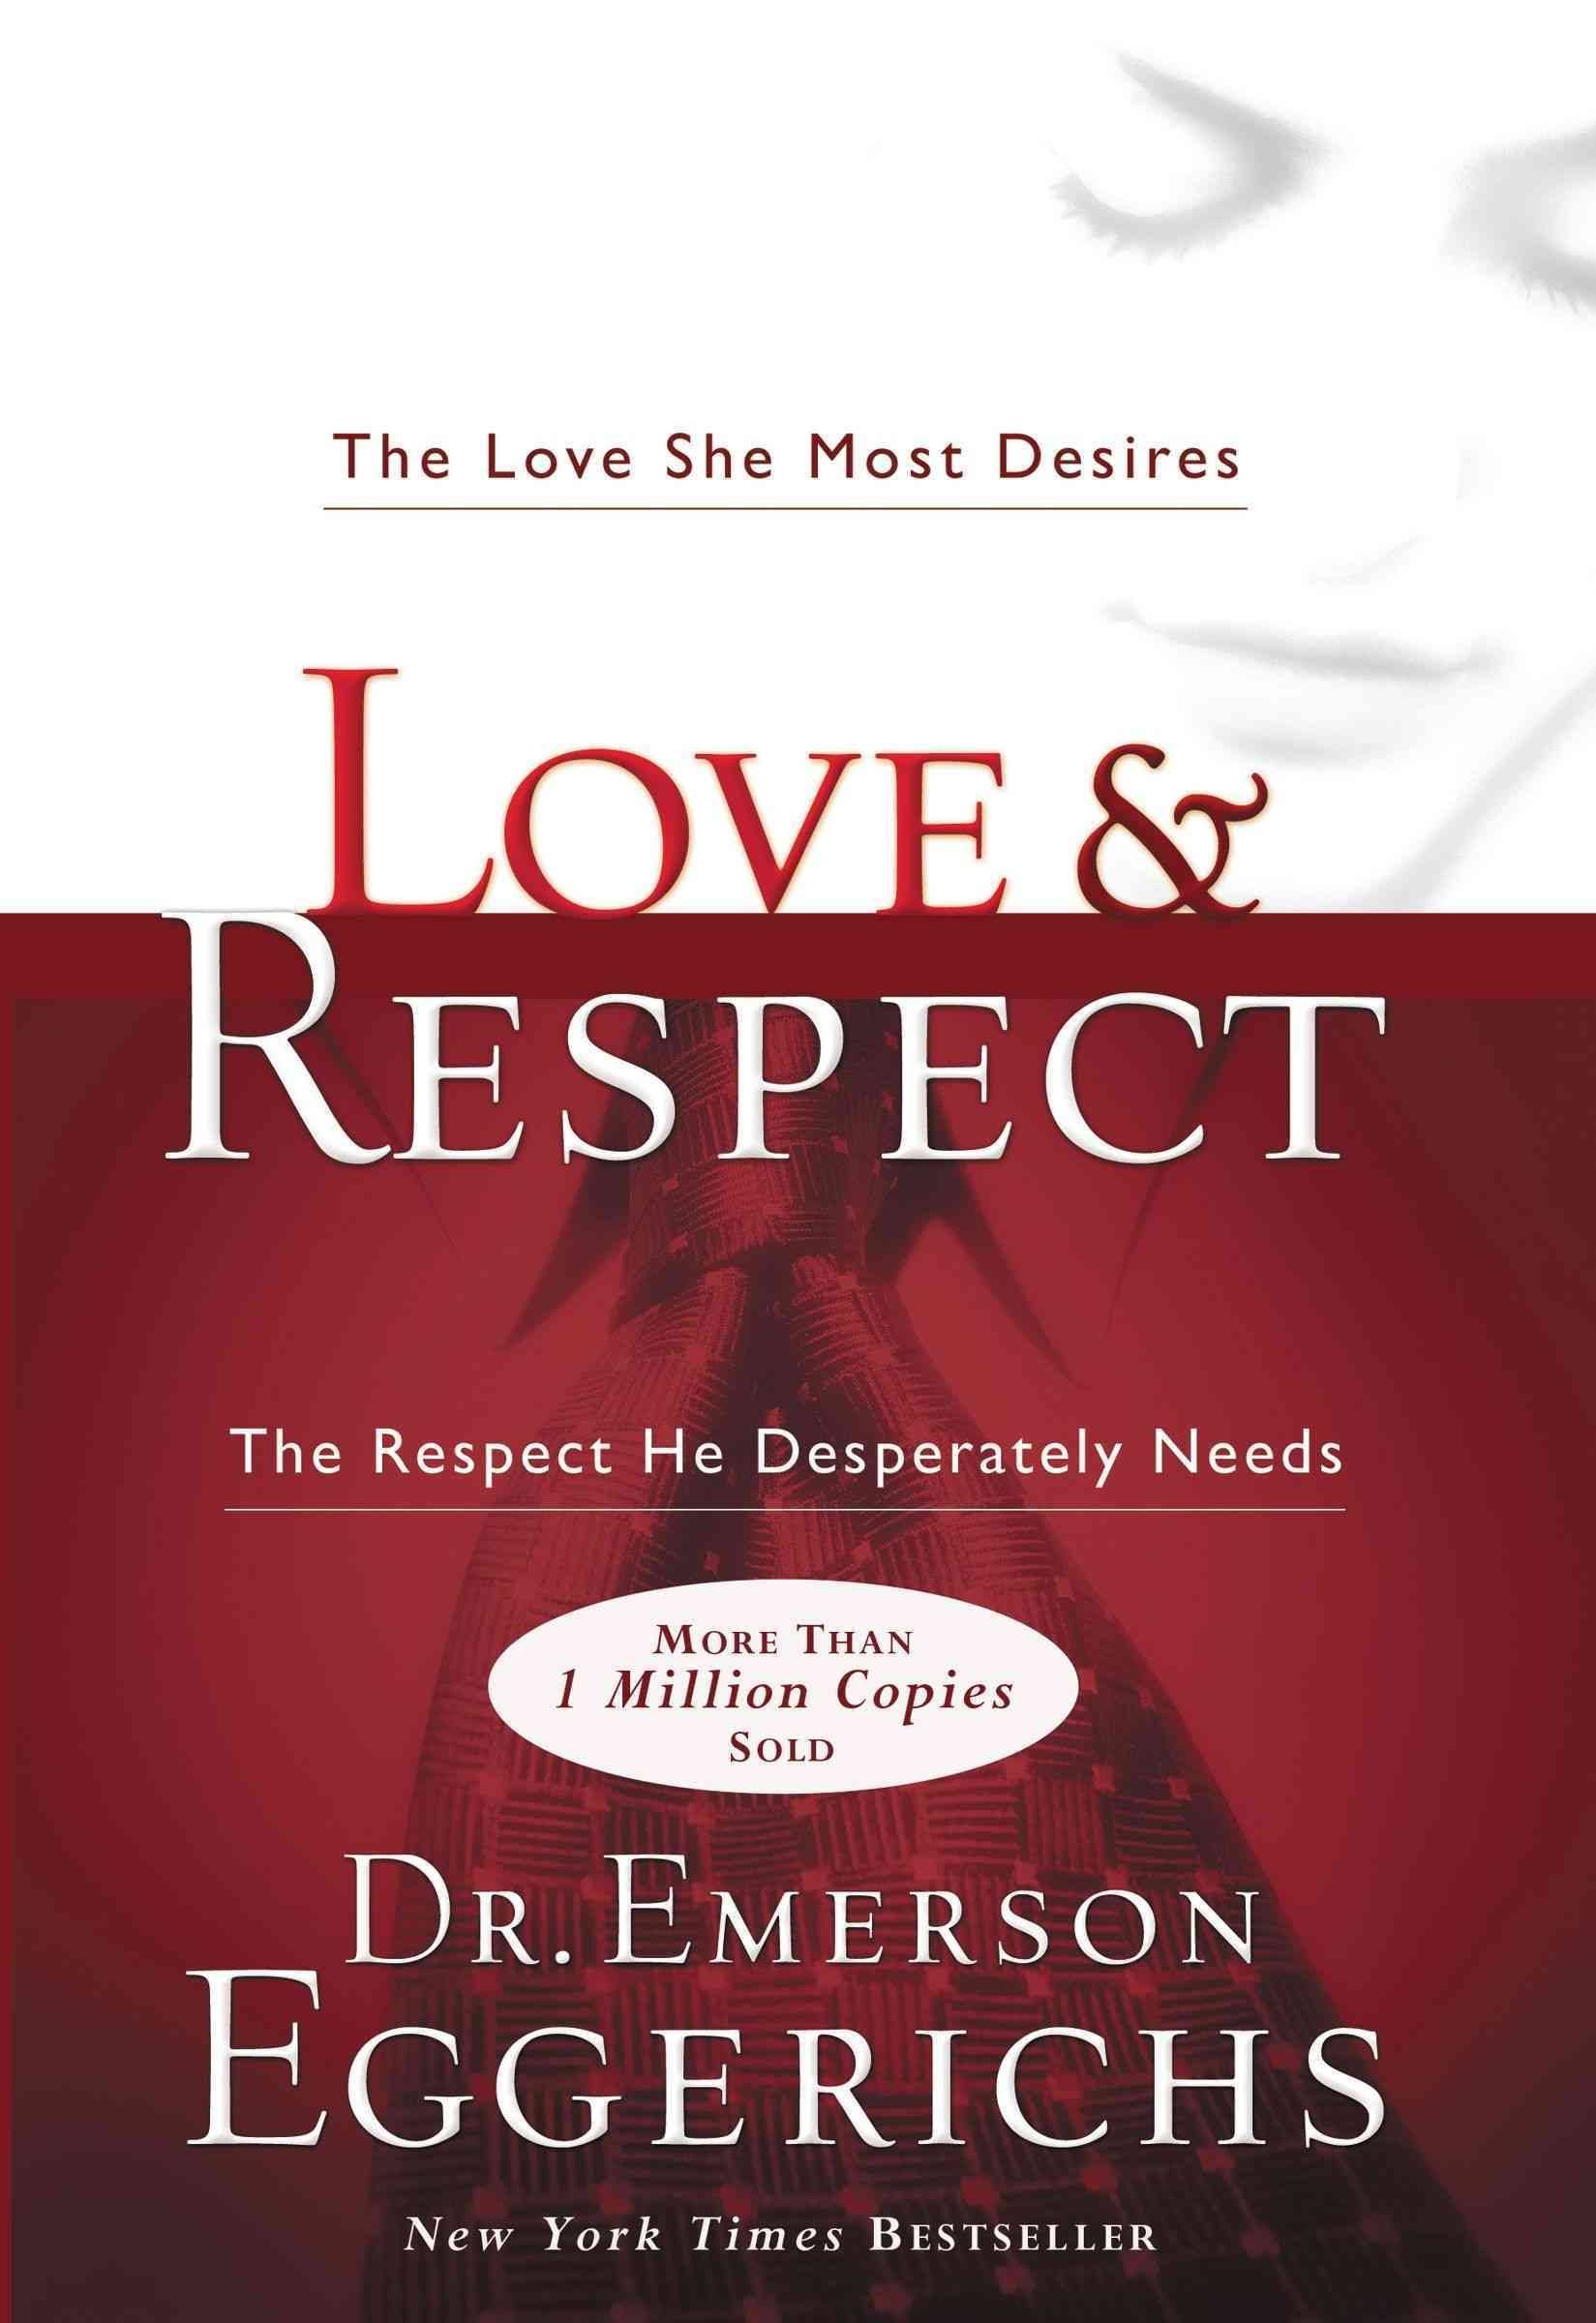 Love & Respect: The Love She Most Desires, the Respect He Desperately Needs [Book]